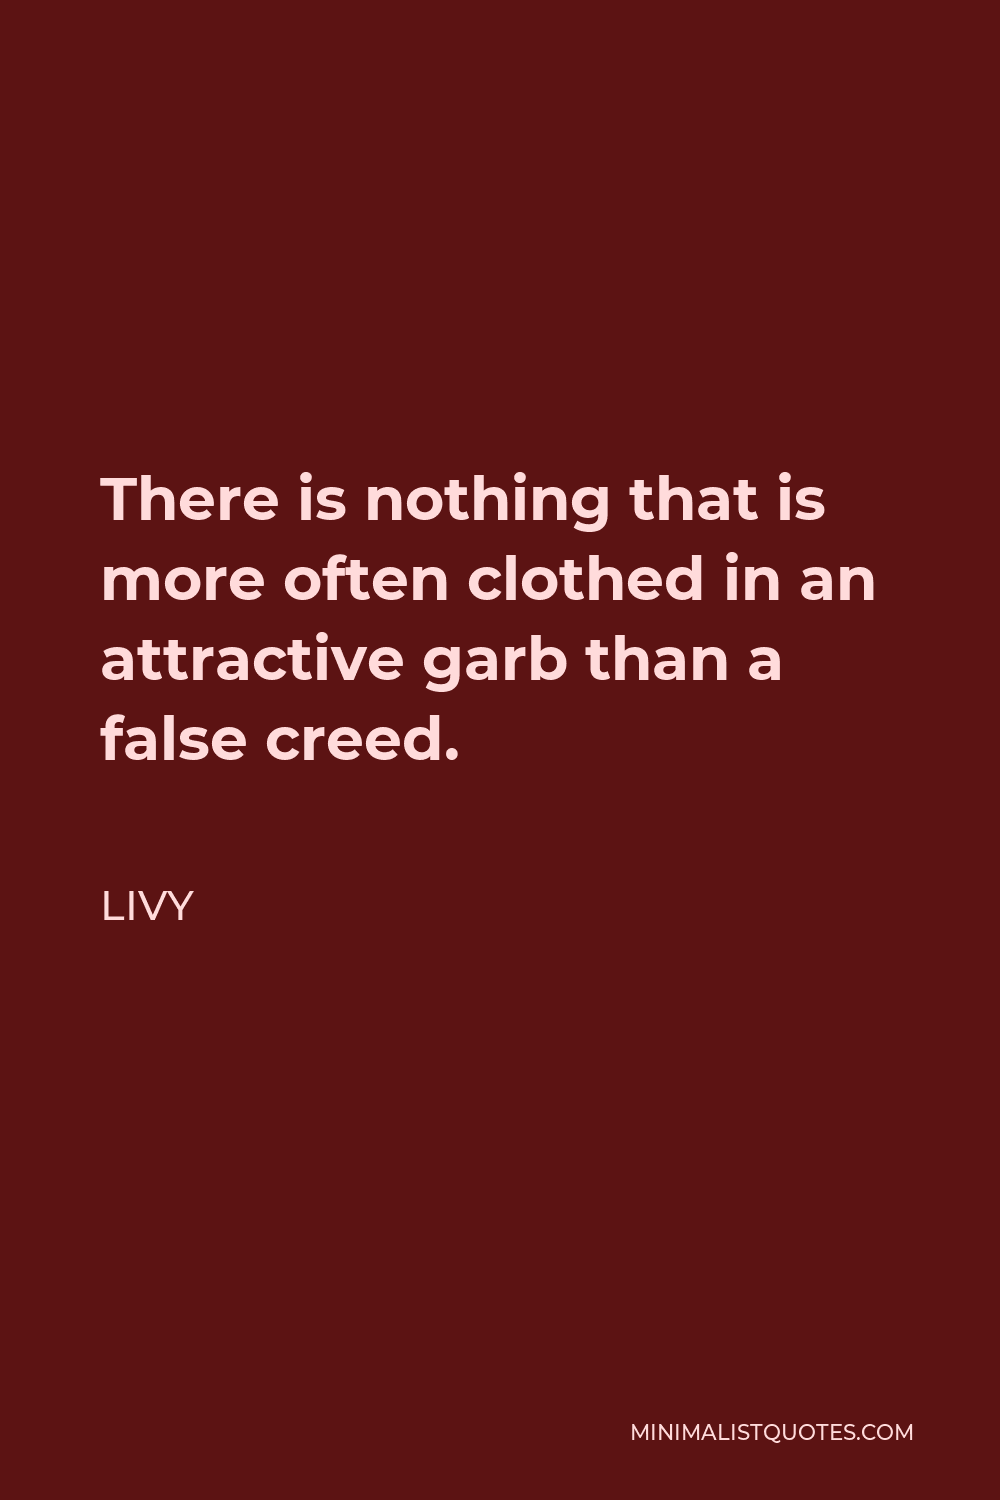 Livy Quote - There is nothing that is more often clothed in an attractive garb than a false creed.